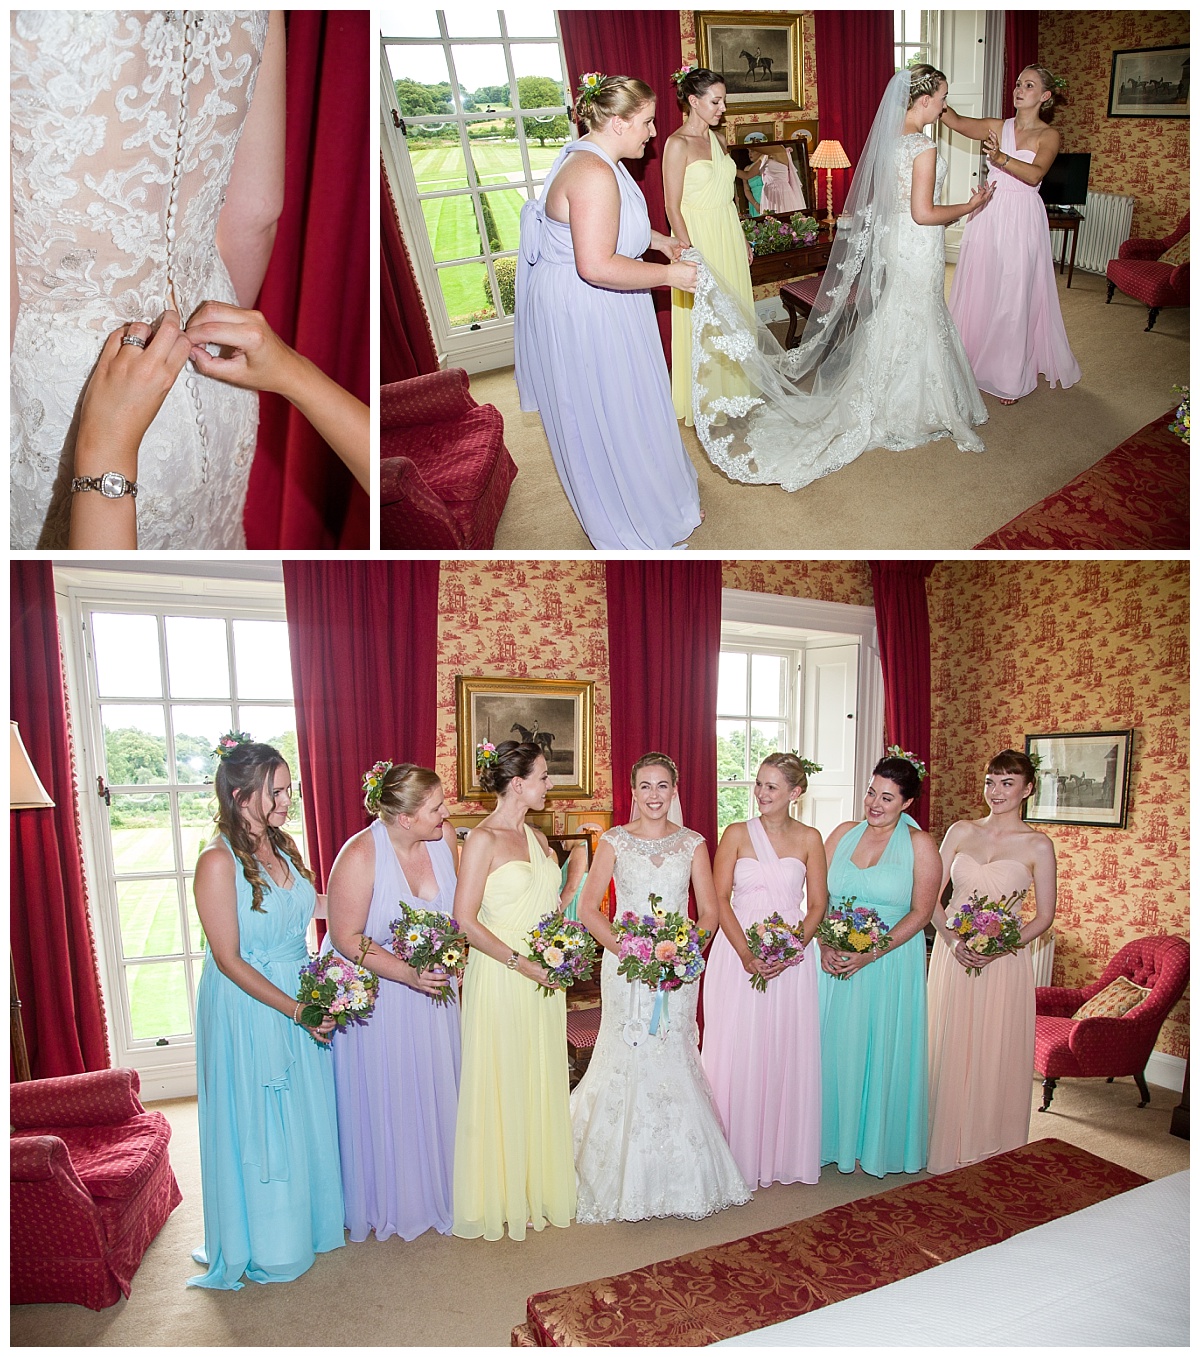 Wedding Photography Manchester - Mel and Lewis's Epic Wedding Day At Knowsley Hall 10